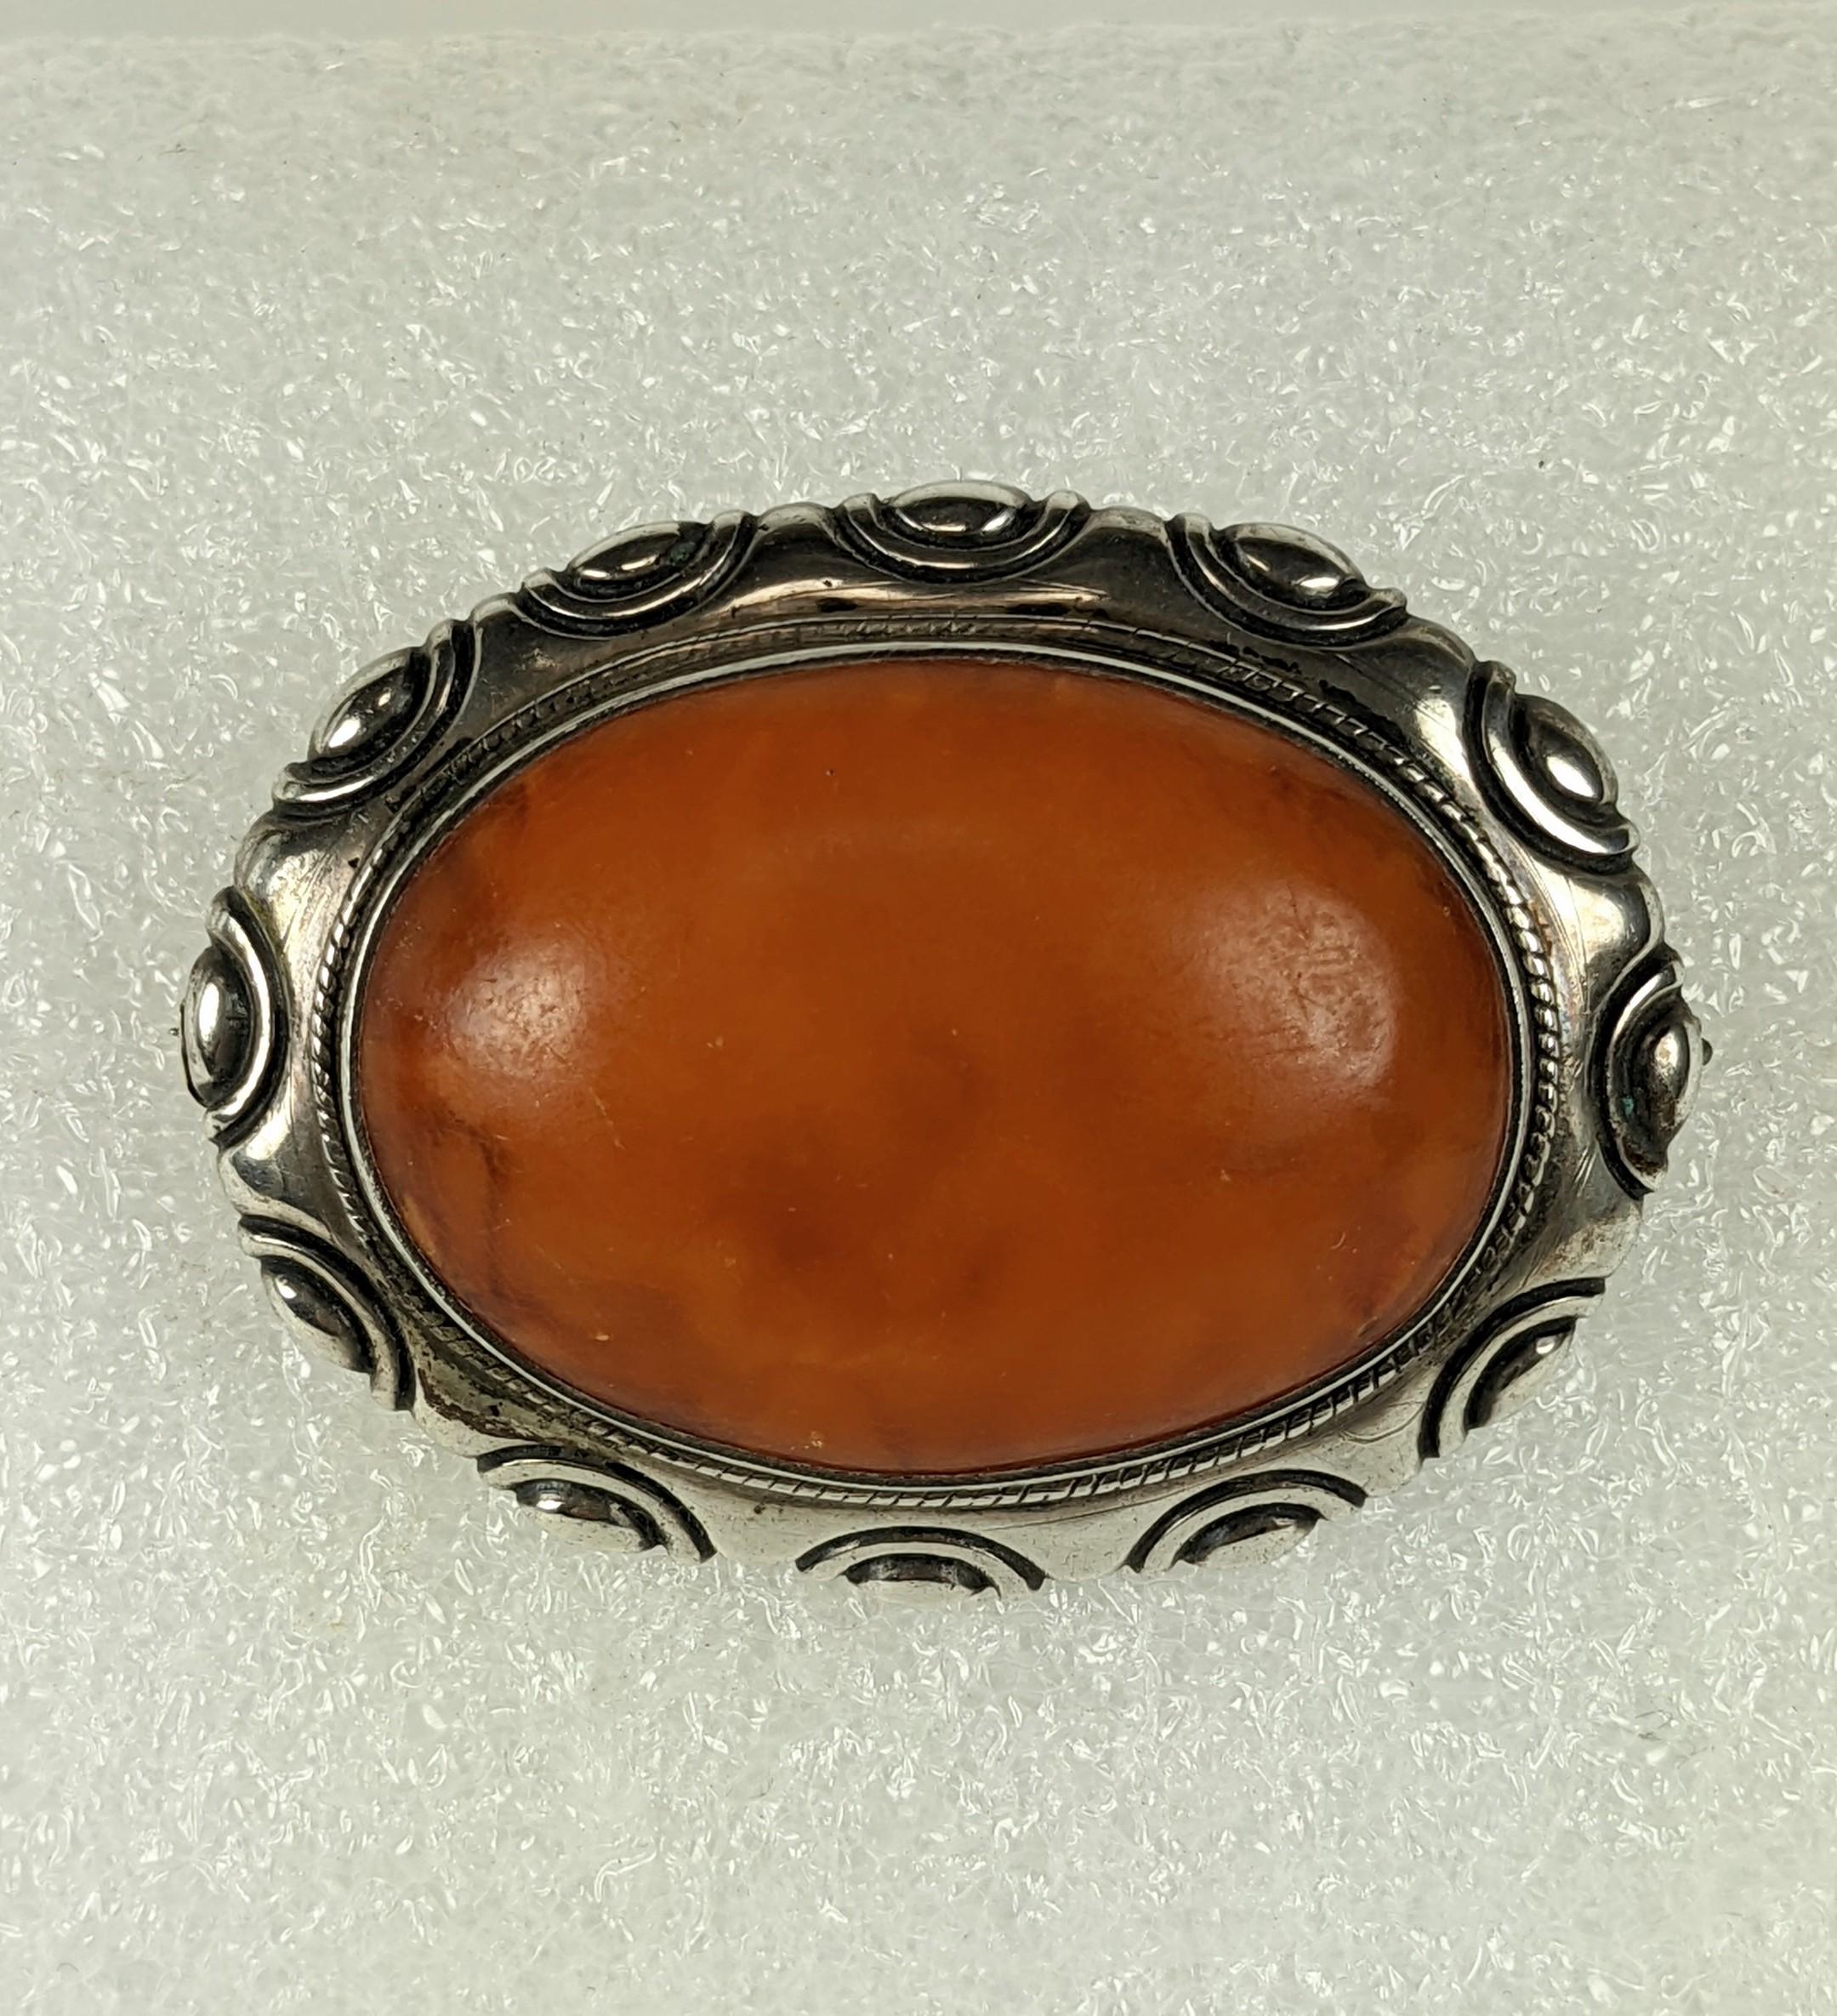 Scandanavian Skonvirke Amber Arts and Crafts Brooch from the turn of the 20th Century. Set in 800 silver with large amber oval cabochon in a repousse border. 
Signed JW, 800 silver. 2.2